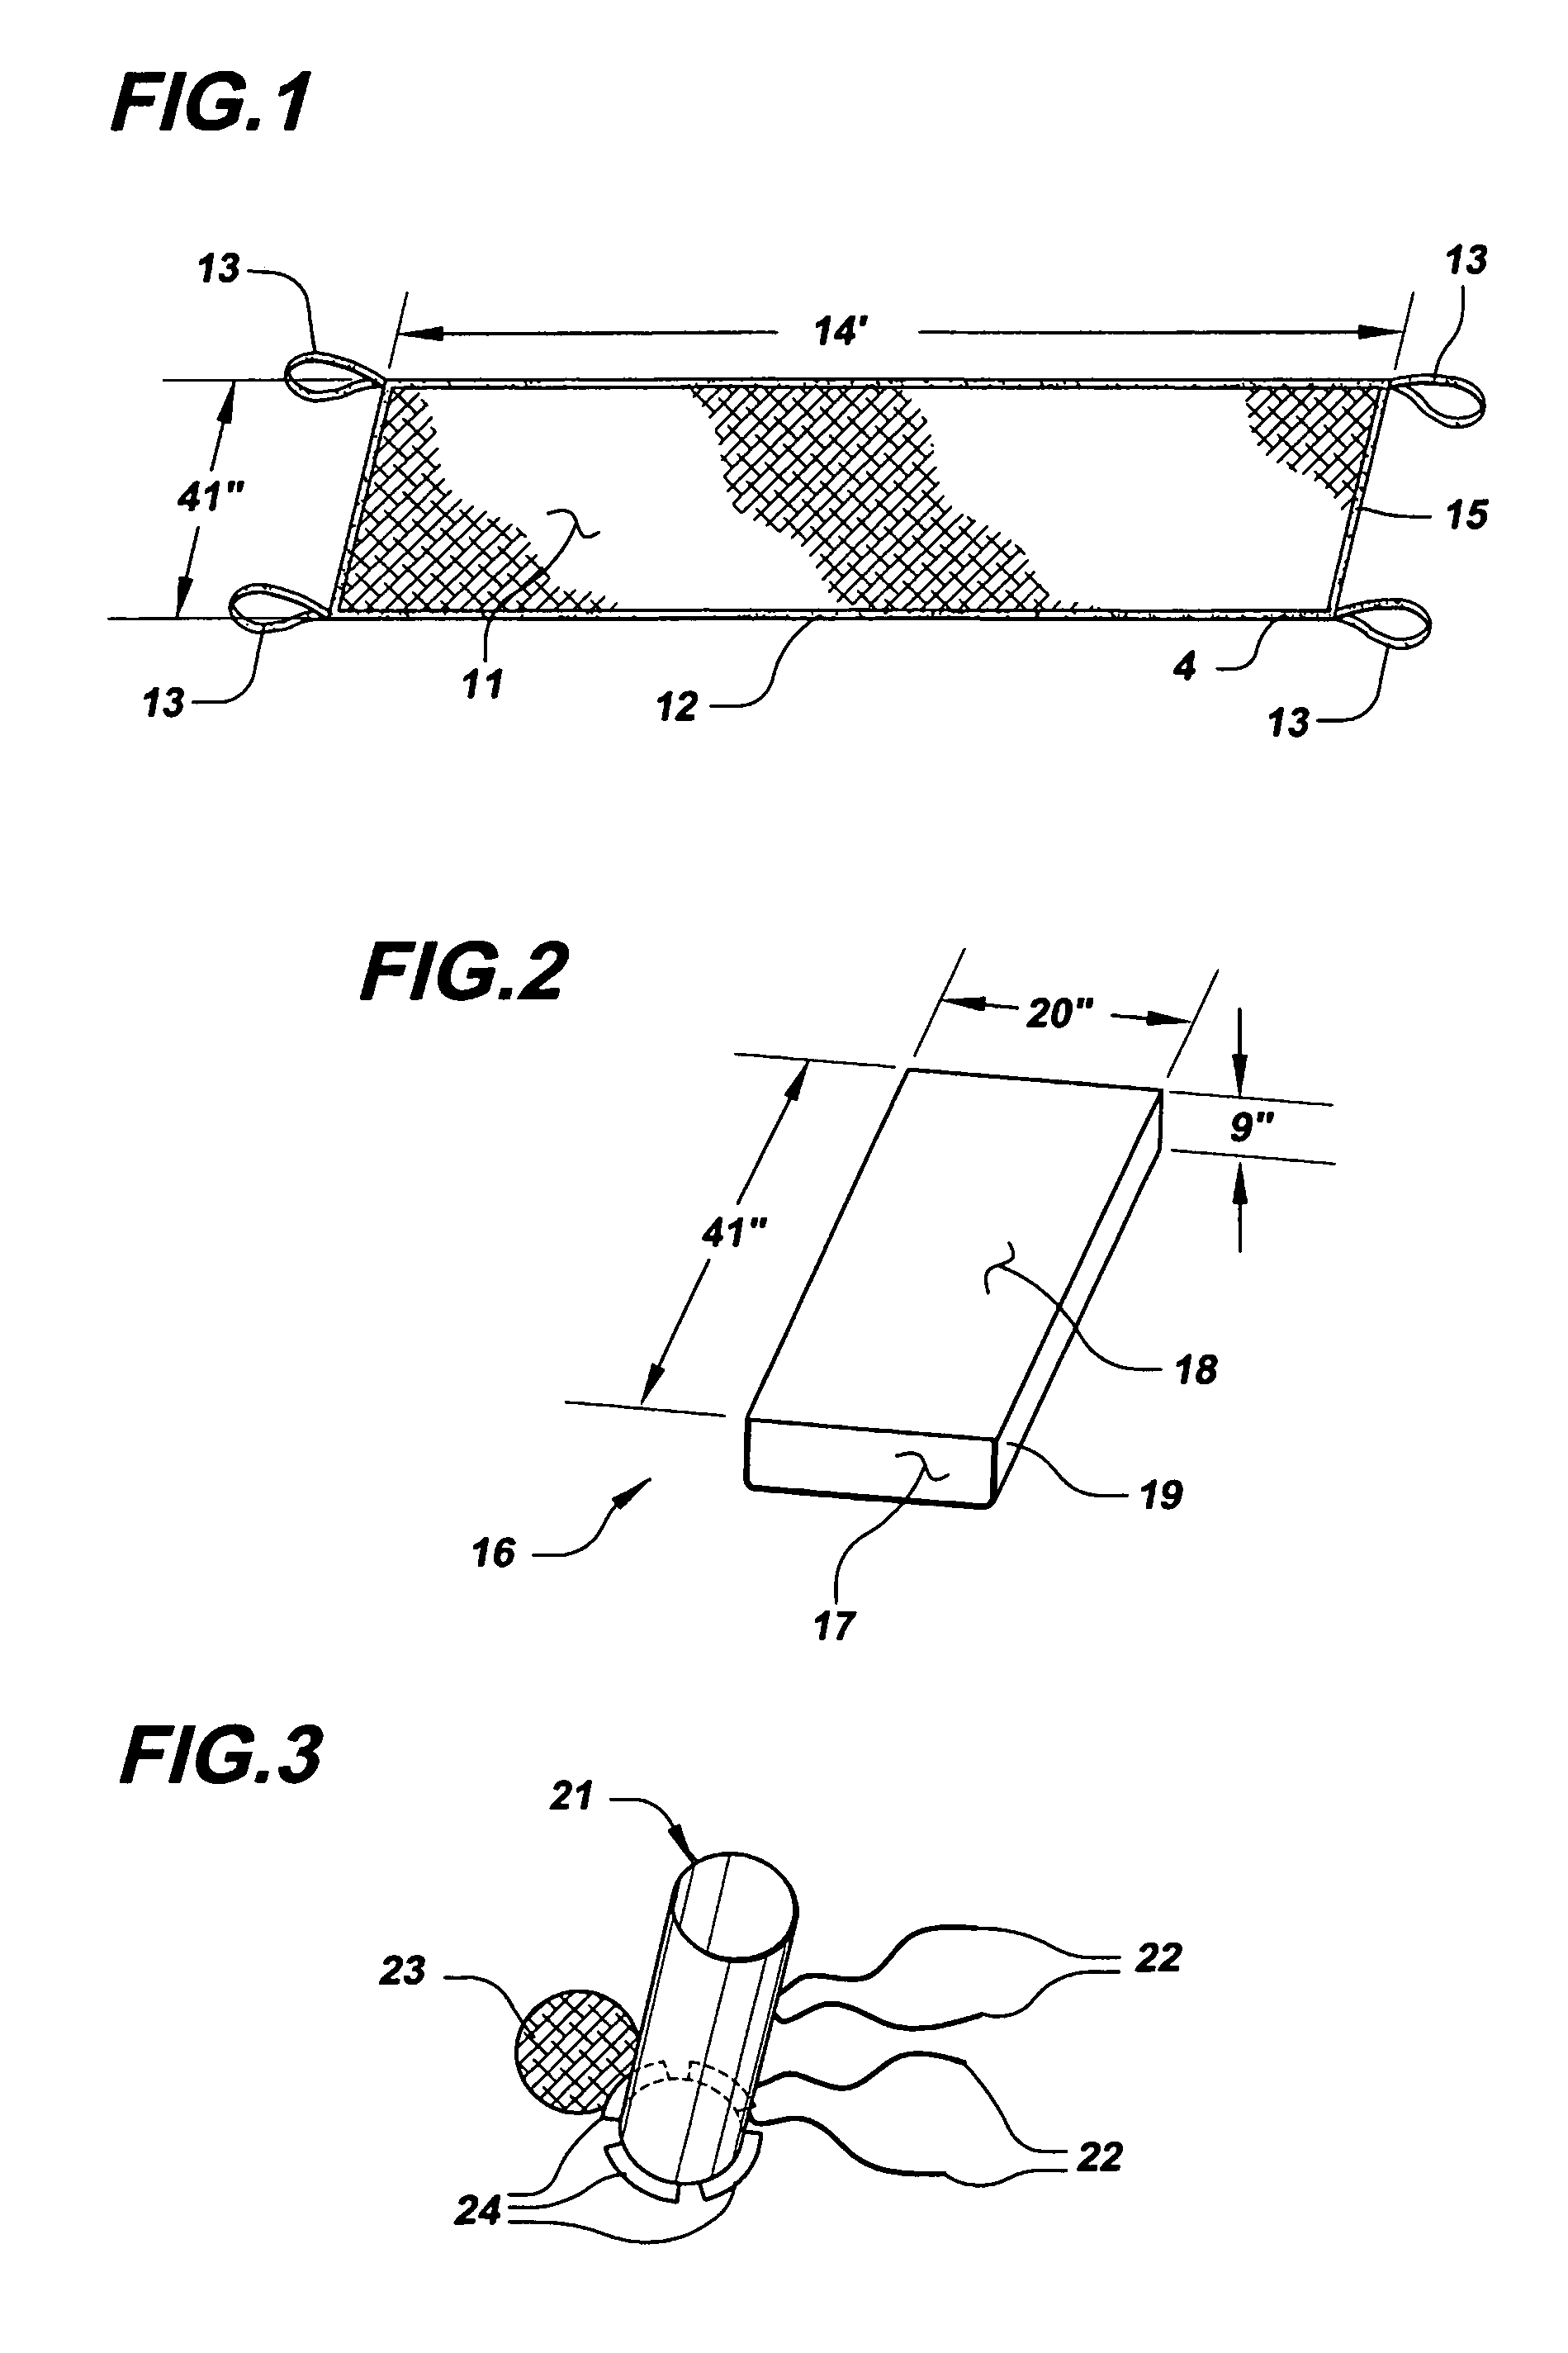 Apparatus for pipeline stabilization and shoreline erosion protection